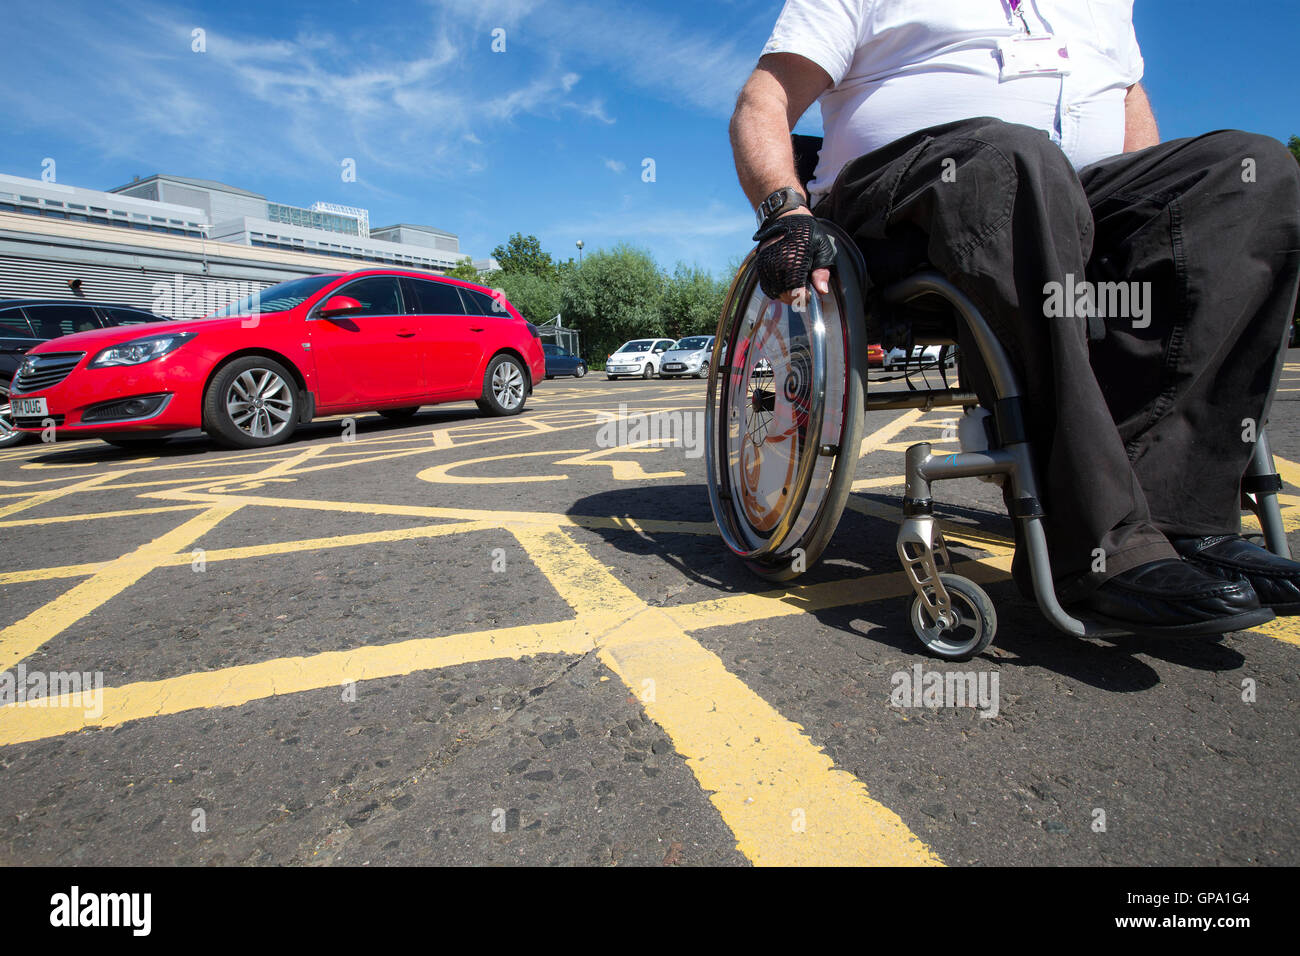 Disabled person using public transport Stock Photo